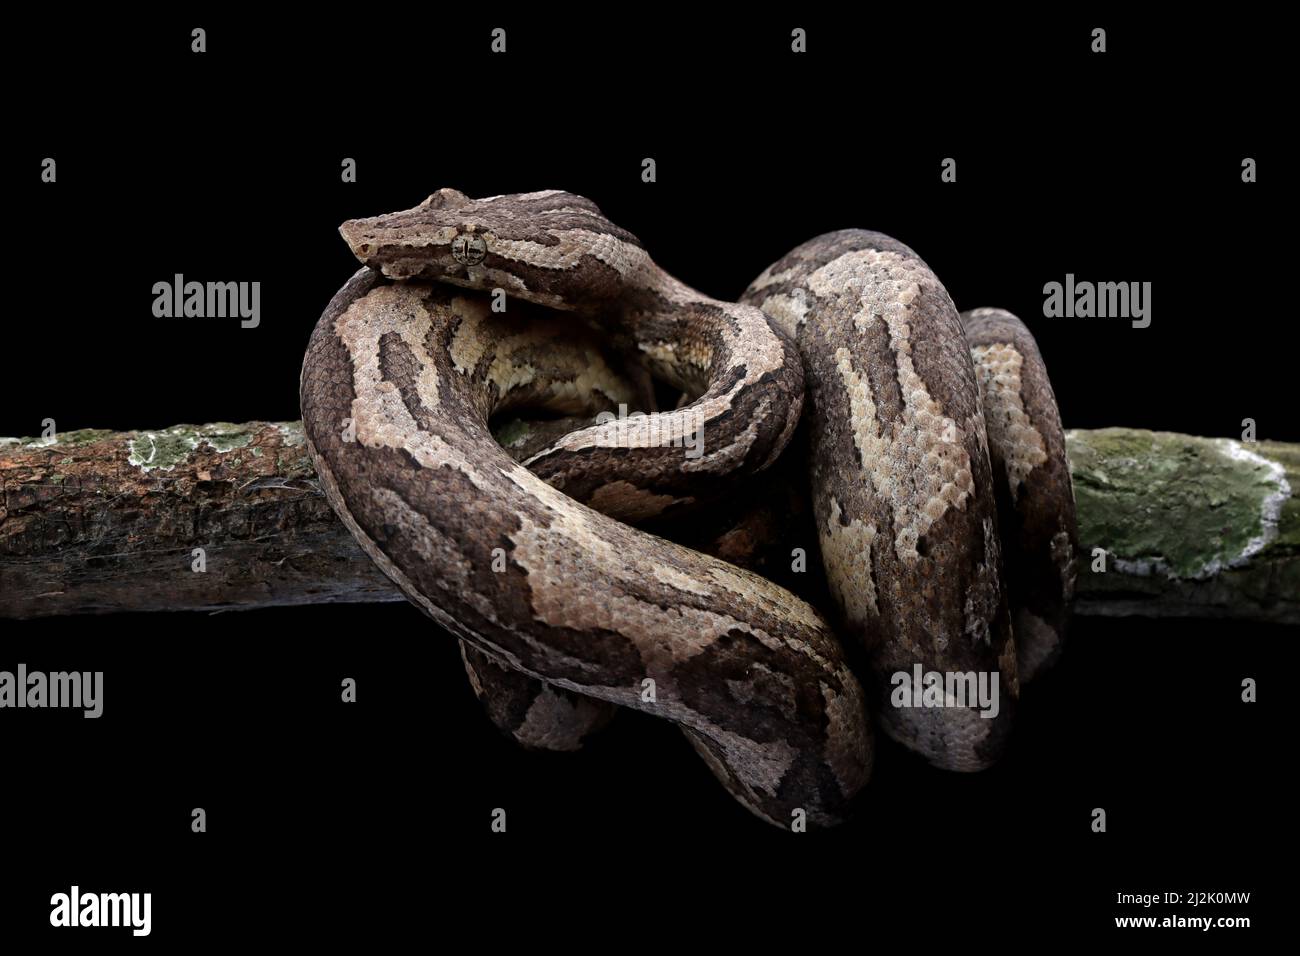 Close-up of a ground boa snake coiled in a ball around a tree branch, Indonesia Stock Photo